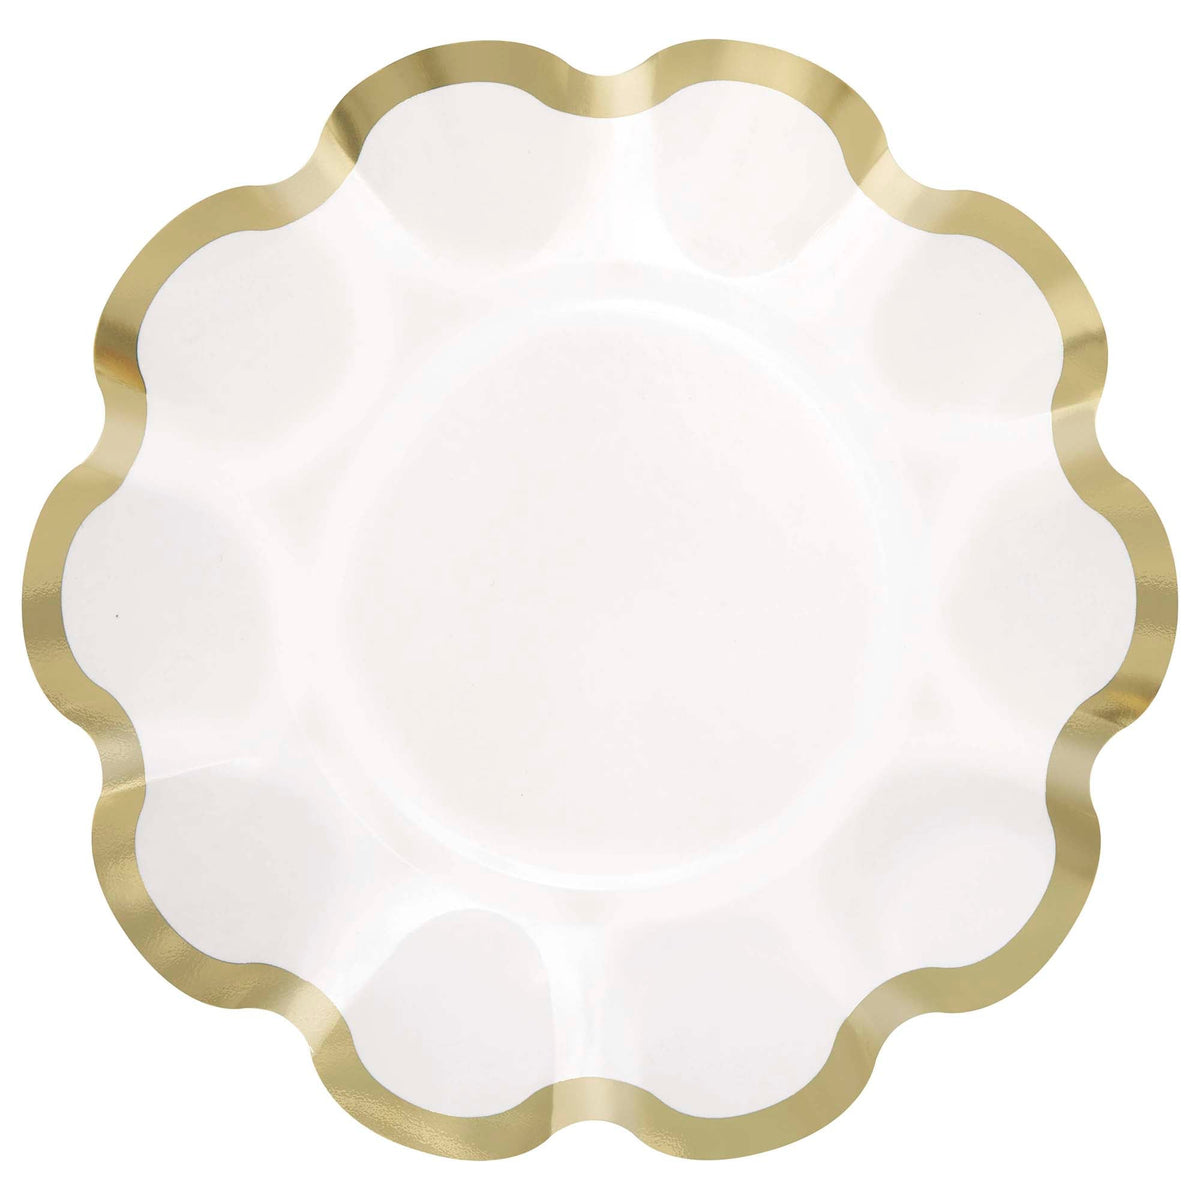 UNIQUE PARTY FAVORS Easter Dainty Easter Large Flower Shaped Lunch Paper Plates, White & Gold, 9 Inches, 8 Count